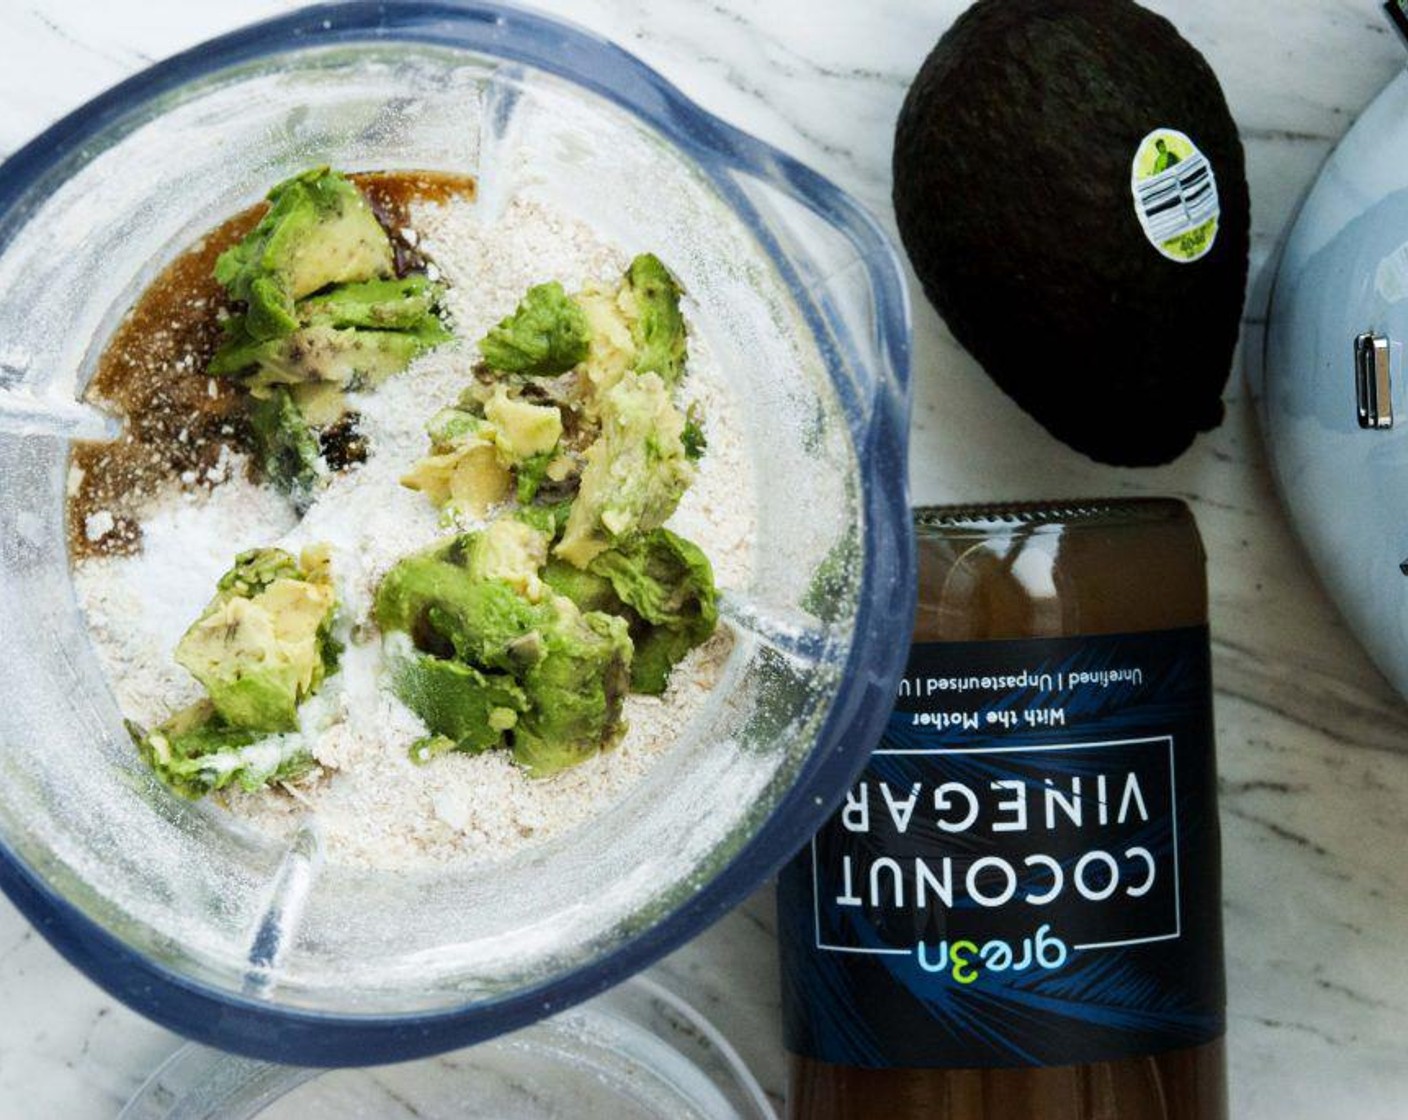 step 1 Place Oat Flour (1 cup), Avocado (1/2), Coconut Vinegar (1 Tbsp), Baking Powder (1/4 tsp), Maple Syrup (1 Tbsp), Vanilla Extract (1/4 tsp), Salt (1 pinch), Matcha Powder (1/4 tsp), and Non-Dairy Milk (1/2 cup) into your blender.